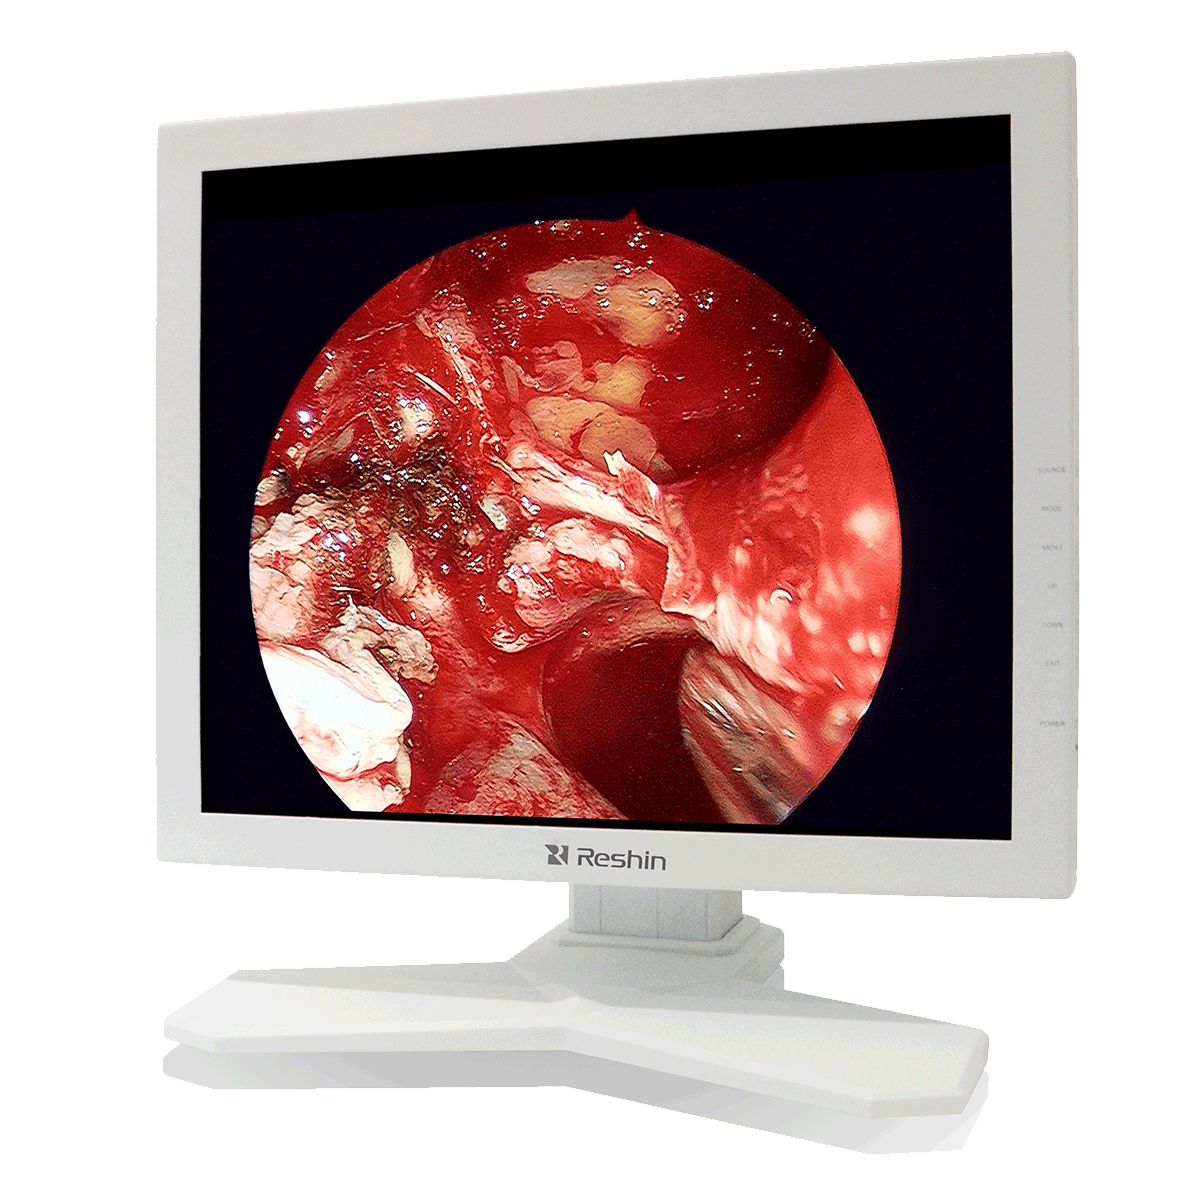 Full-interface 19 inch hospital led monitor with top IPS medical panel